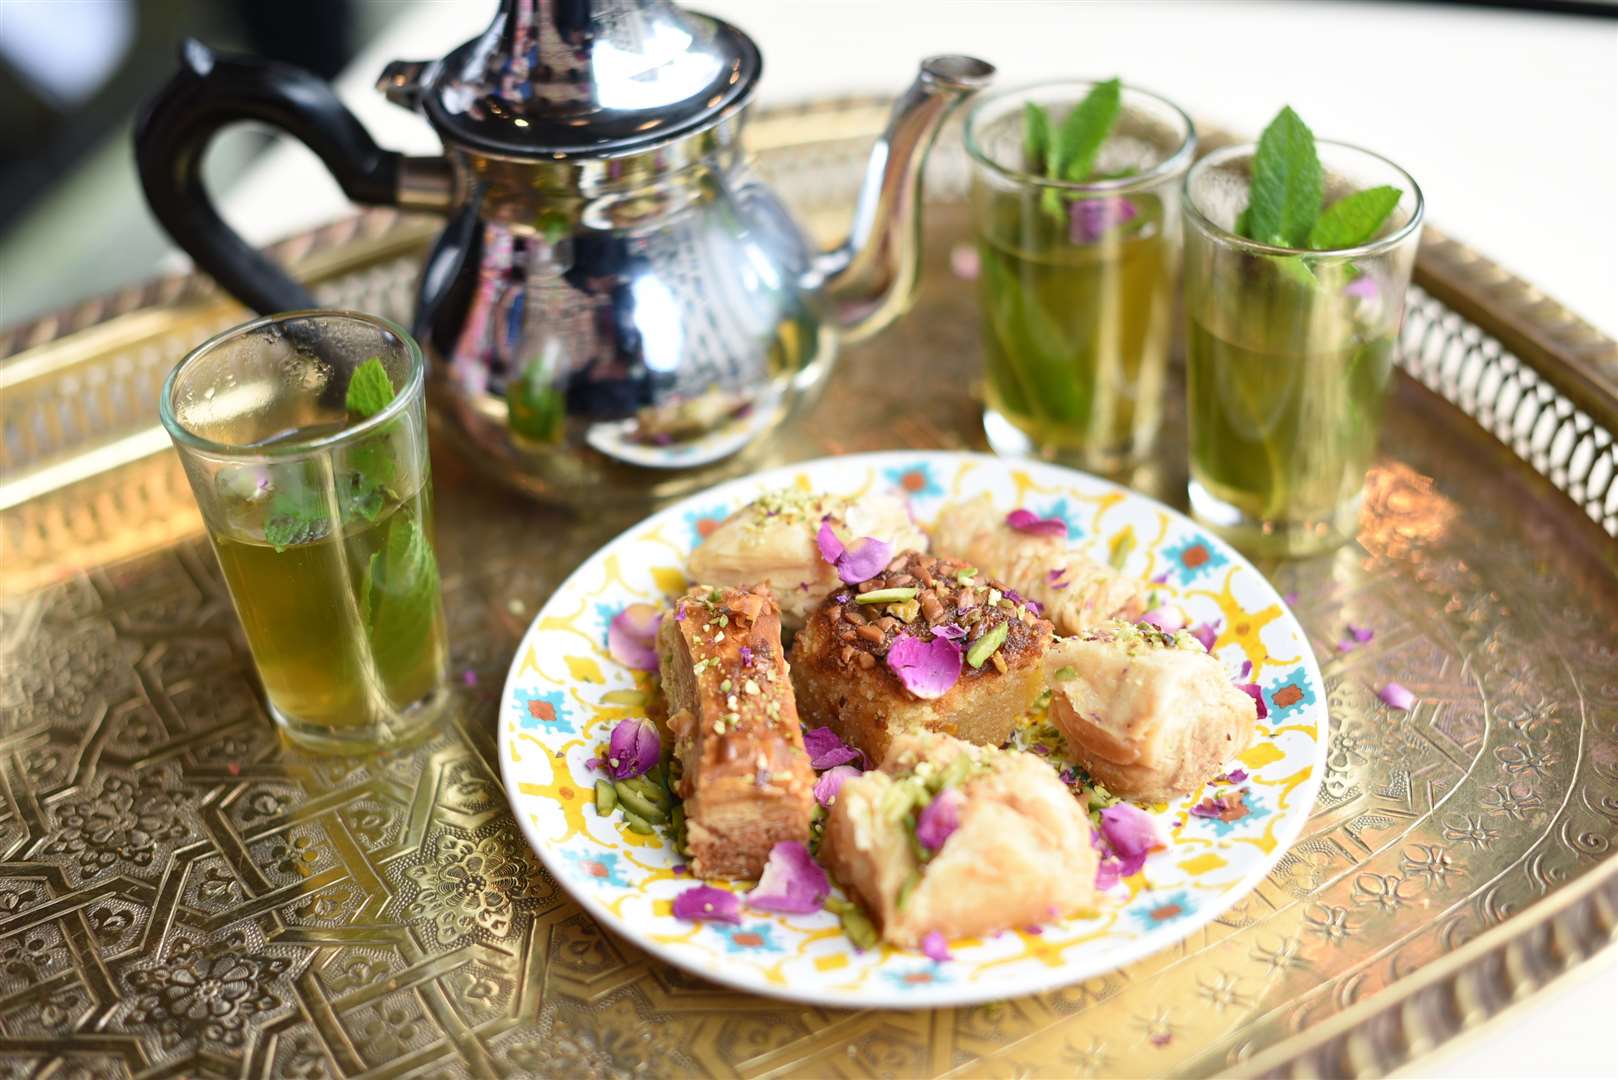 Rose mint tea and Baklawa are among the menu's most popular items (13216656)